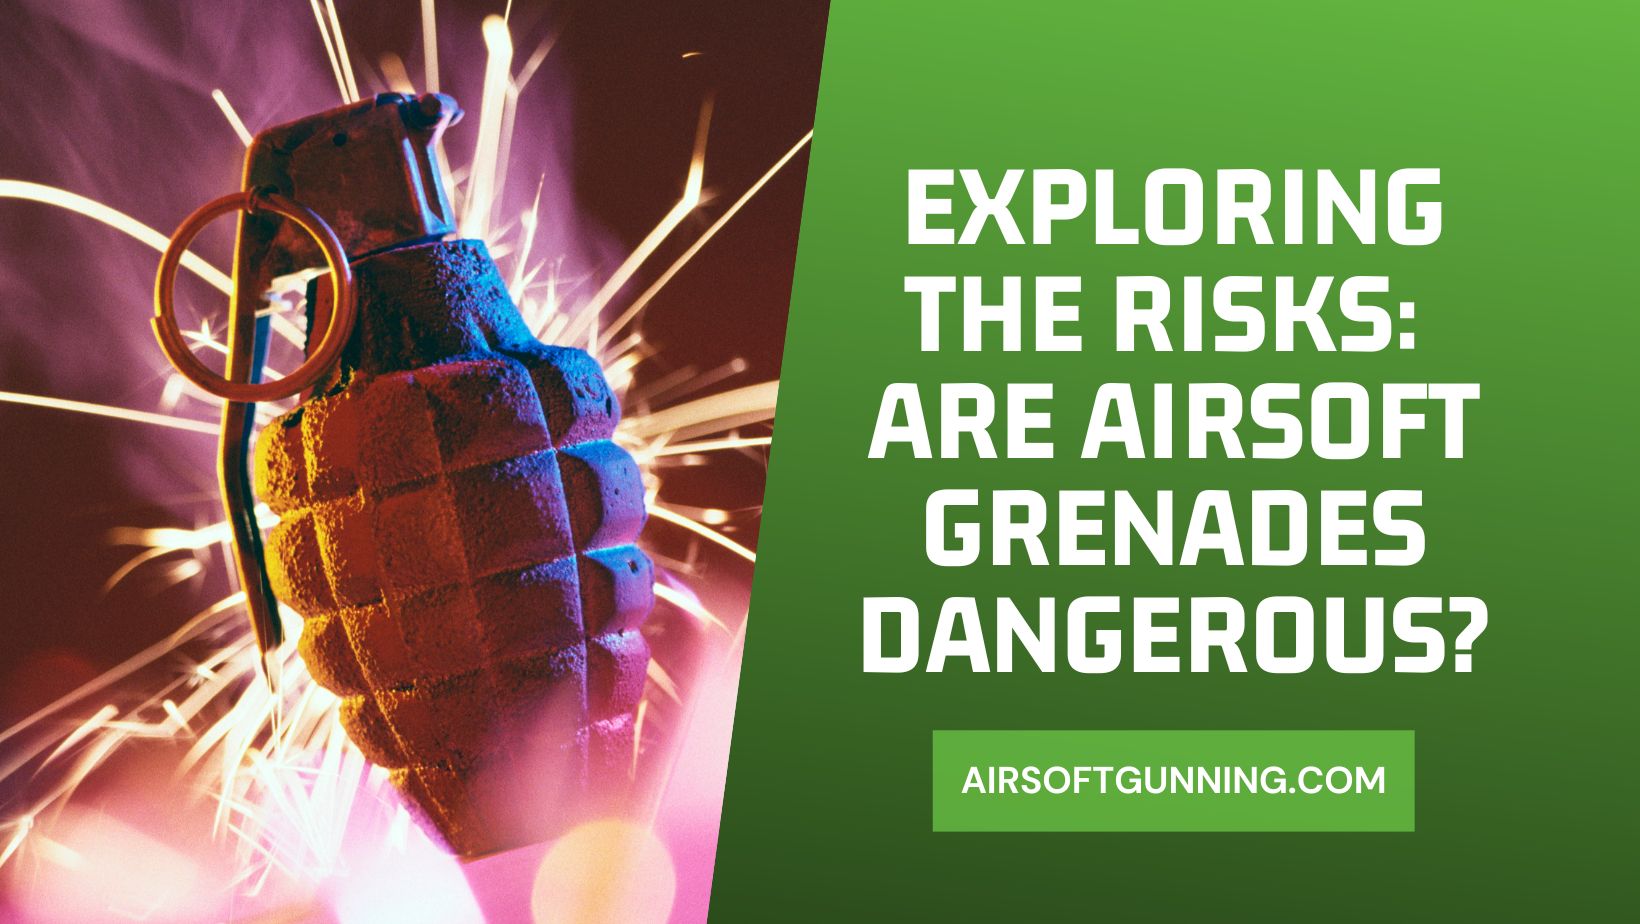 Are Airsoft Grenades Dangerous